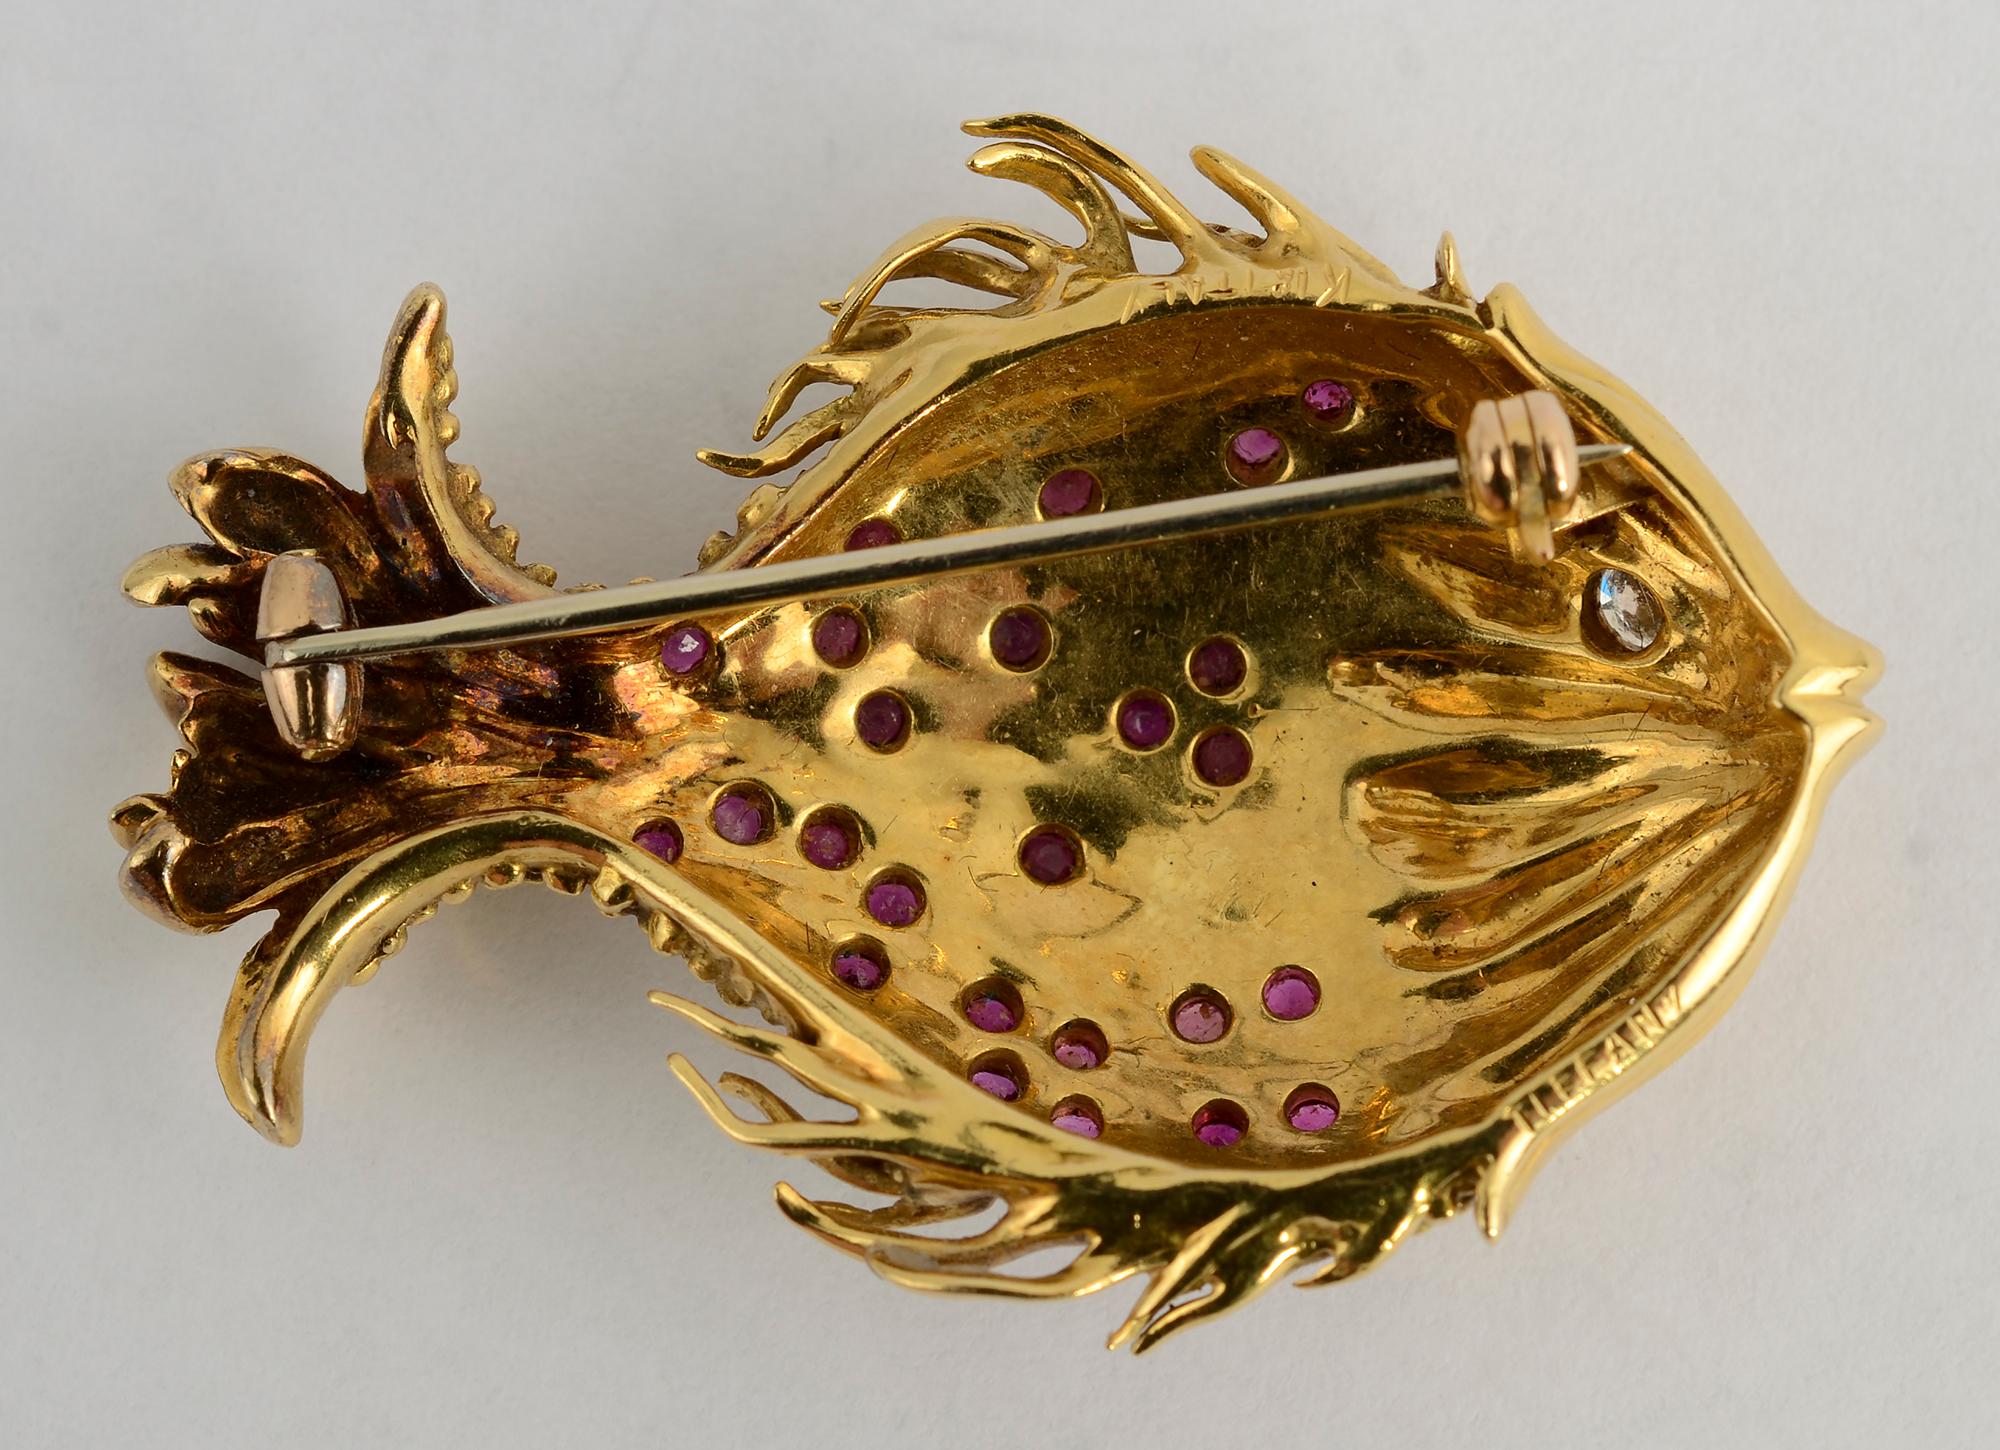 Contemporary Tiffany & Co. Gold Fish Brooch with Rubies